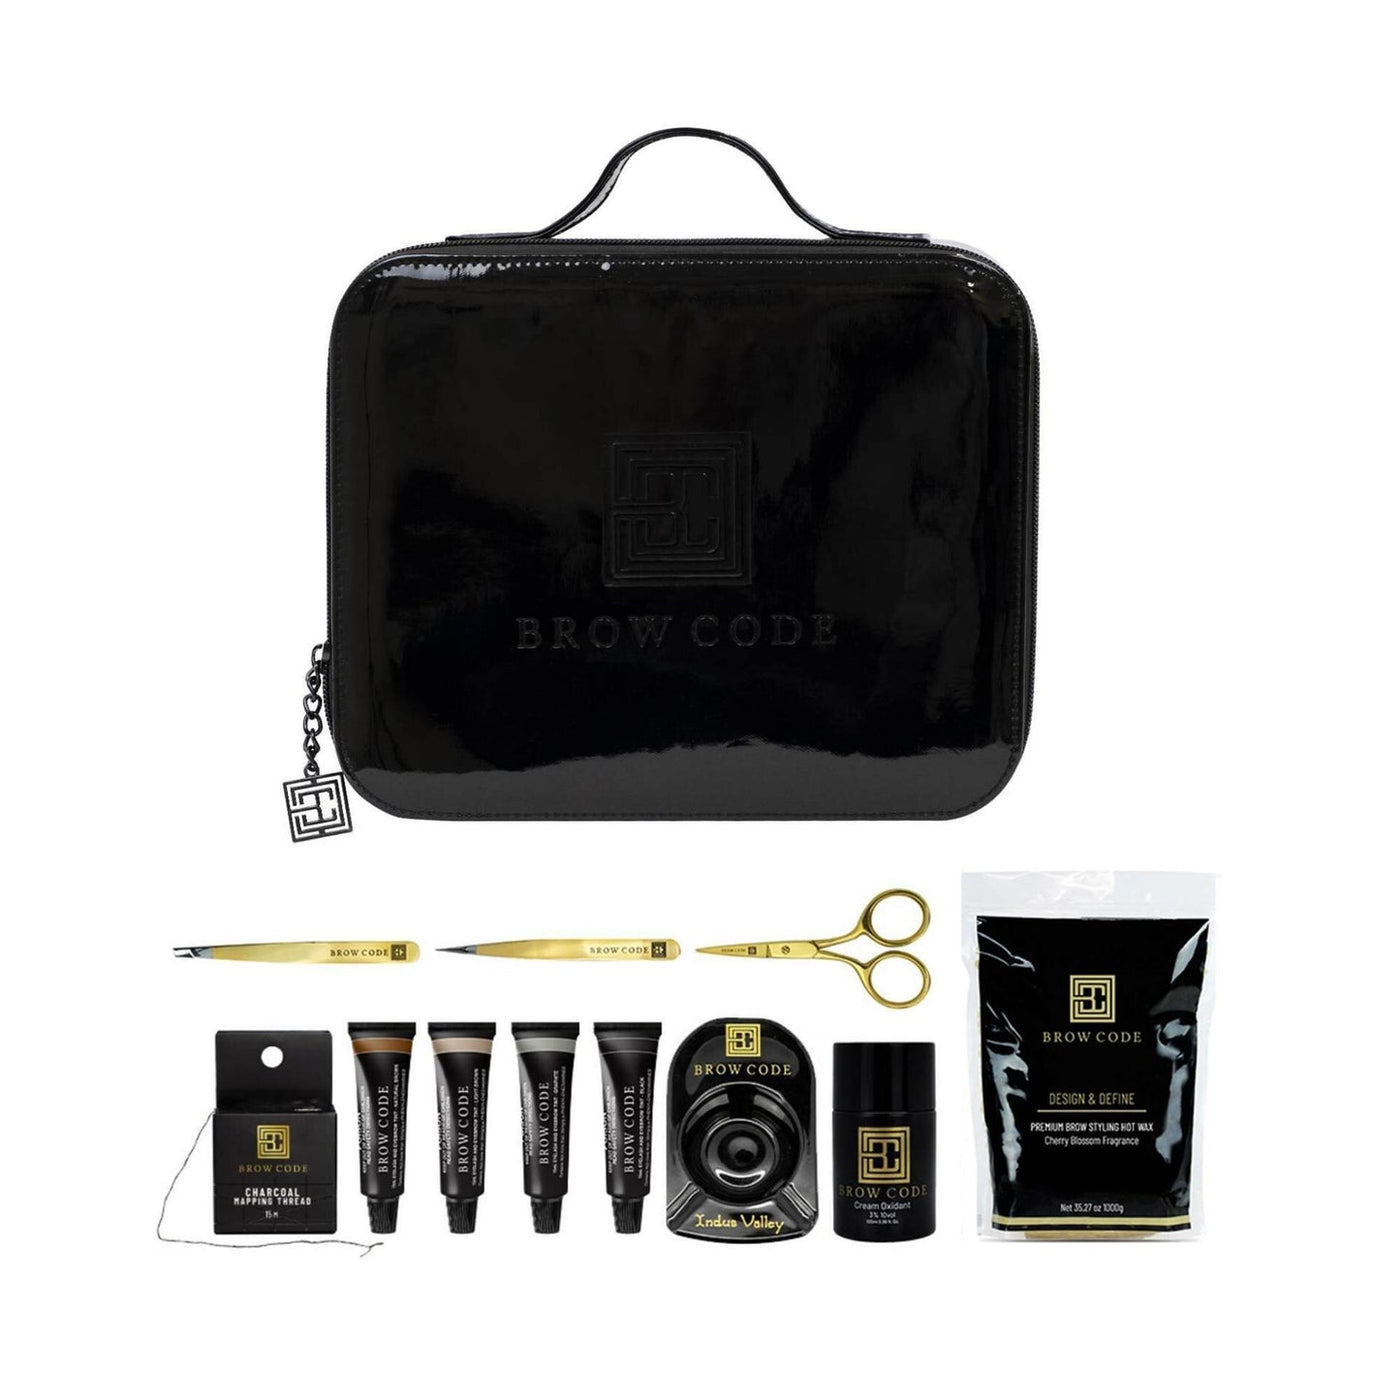 Brow Code Pro Tint Kit with Cosmetic Bag